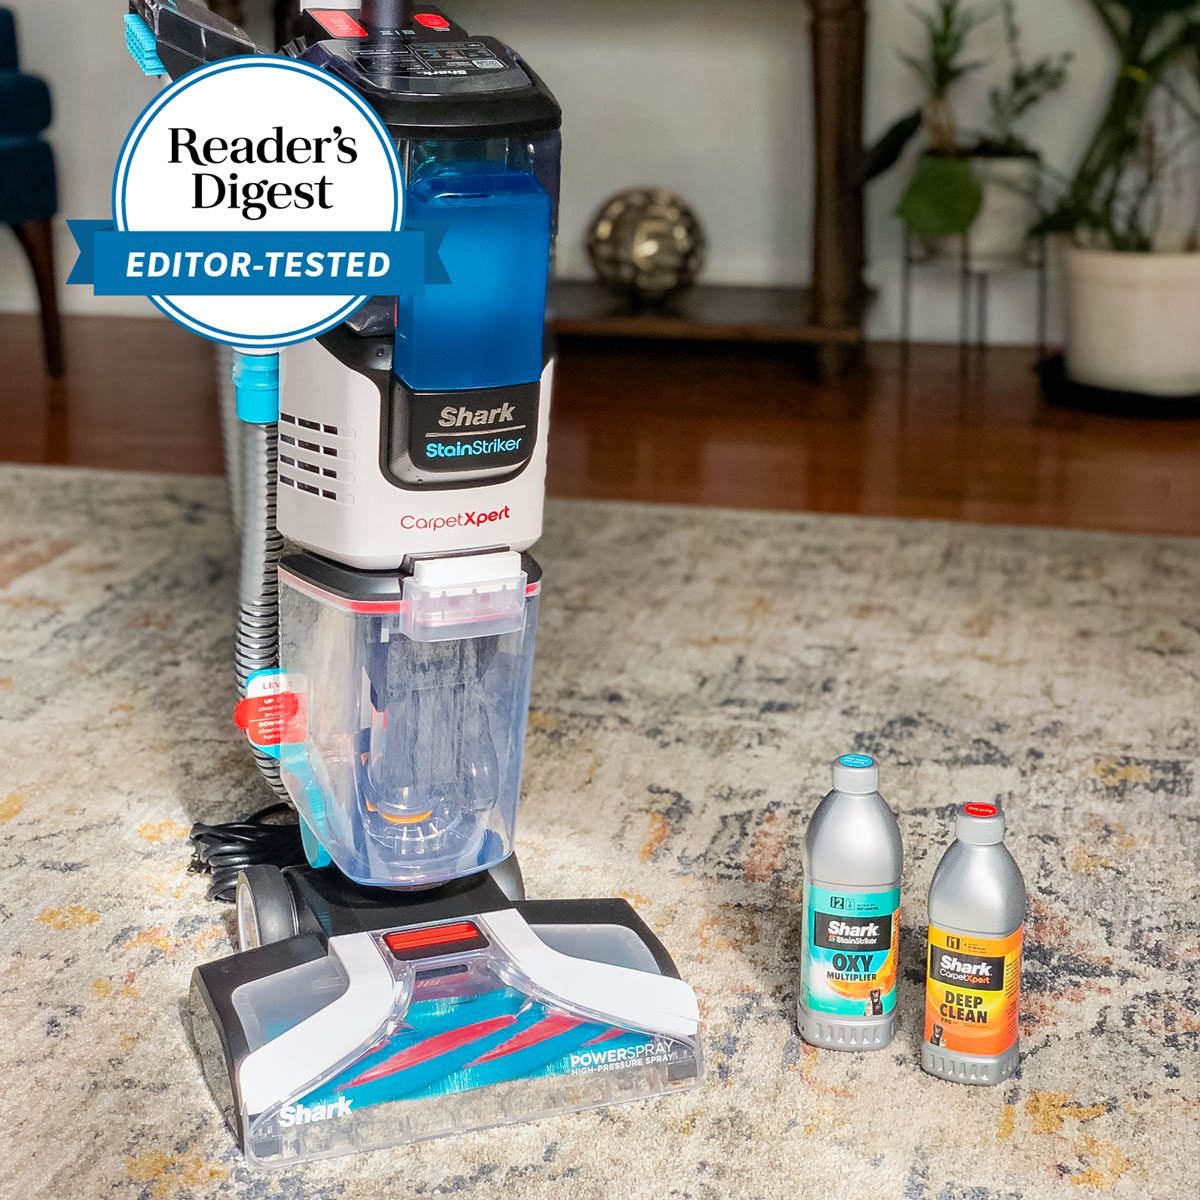 The 7 Best Carpet Cleaners of 2024, Tested & Reviewed